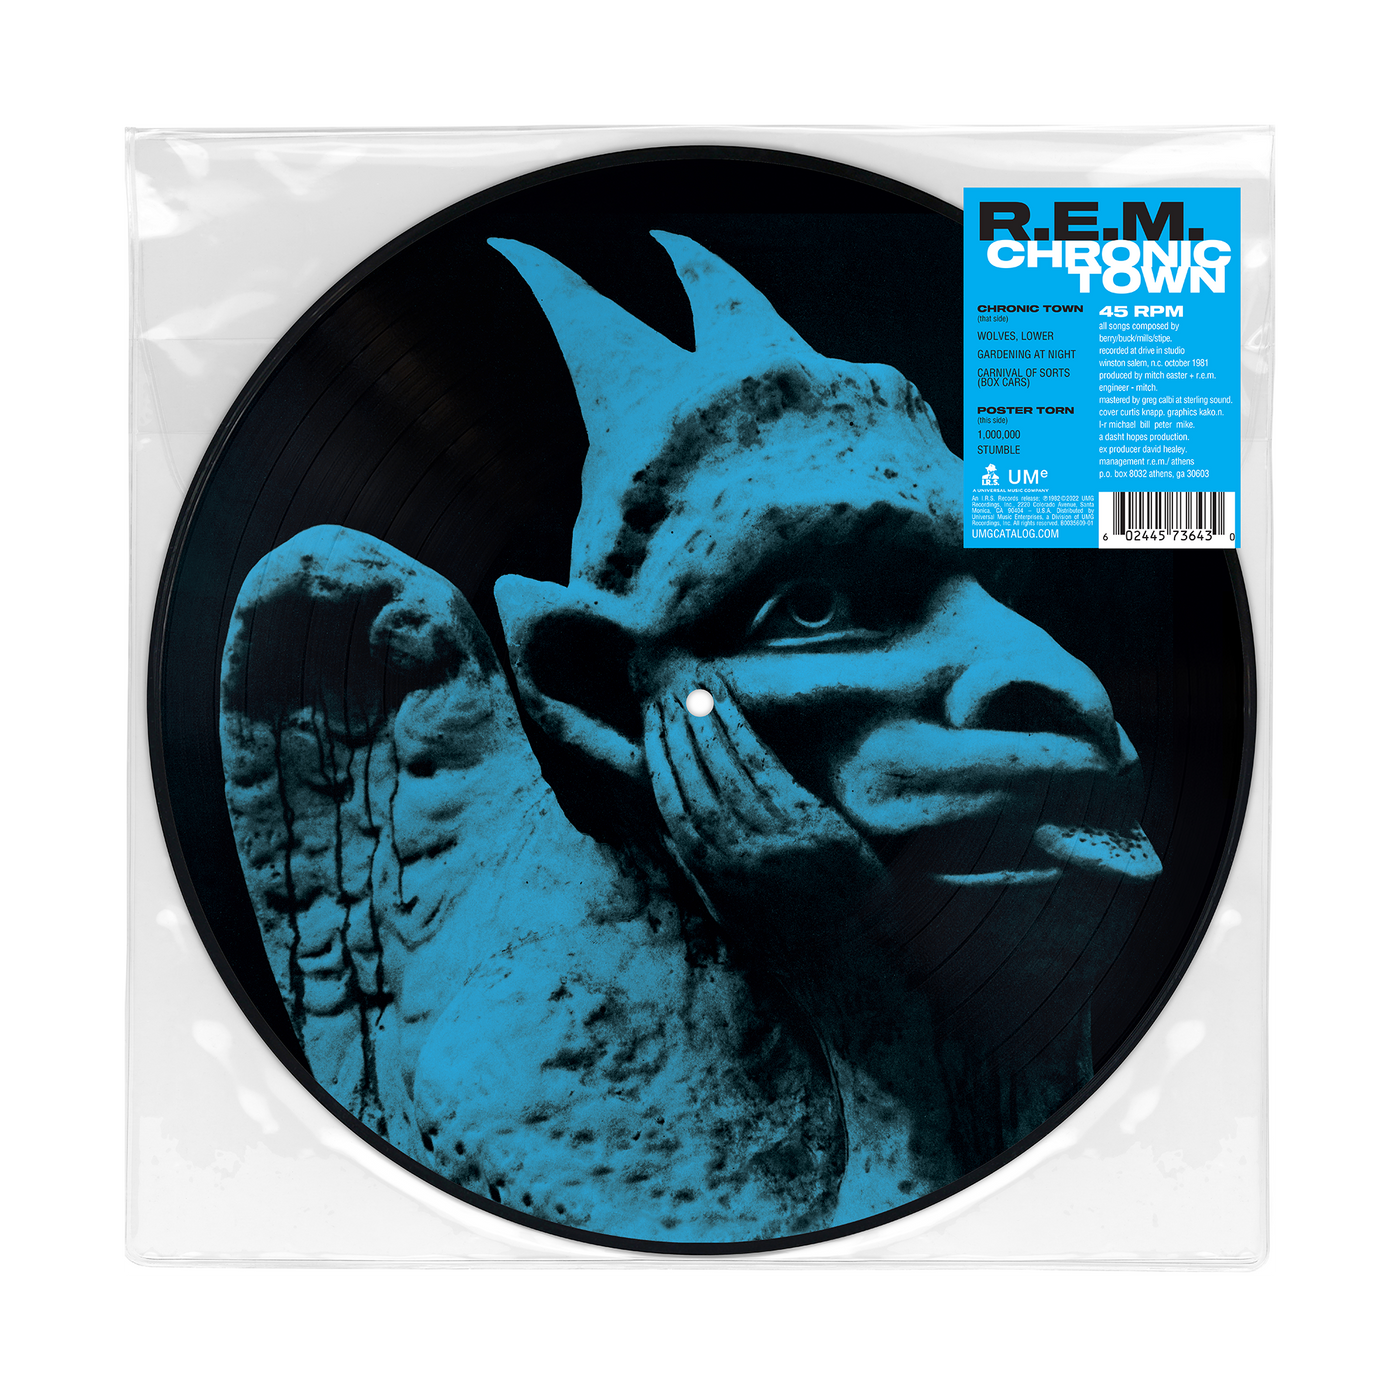 Chronic Town (Picture Disc EP)